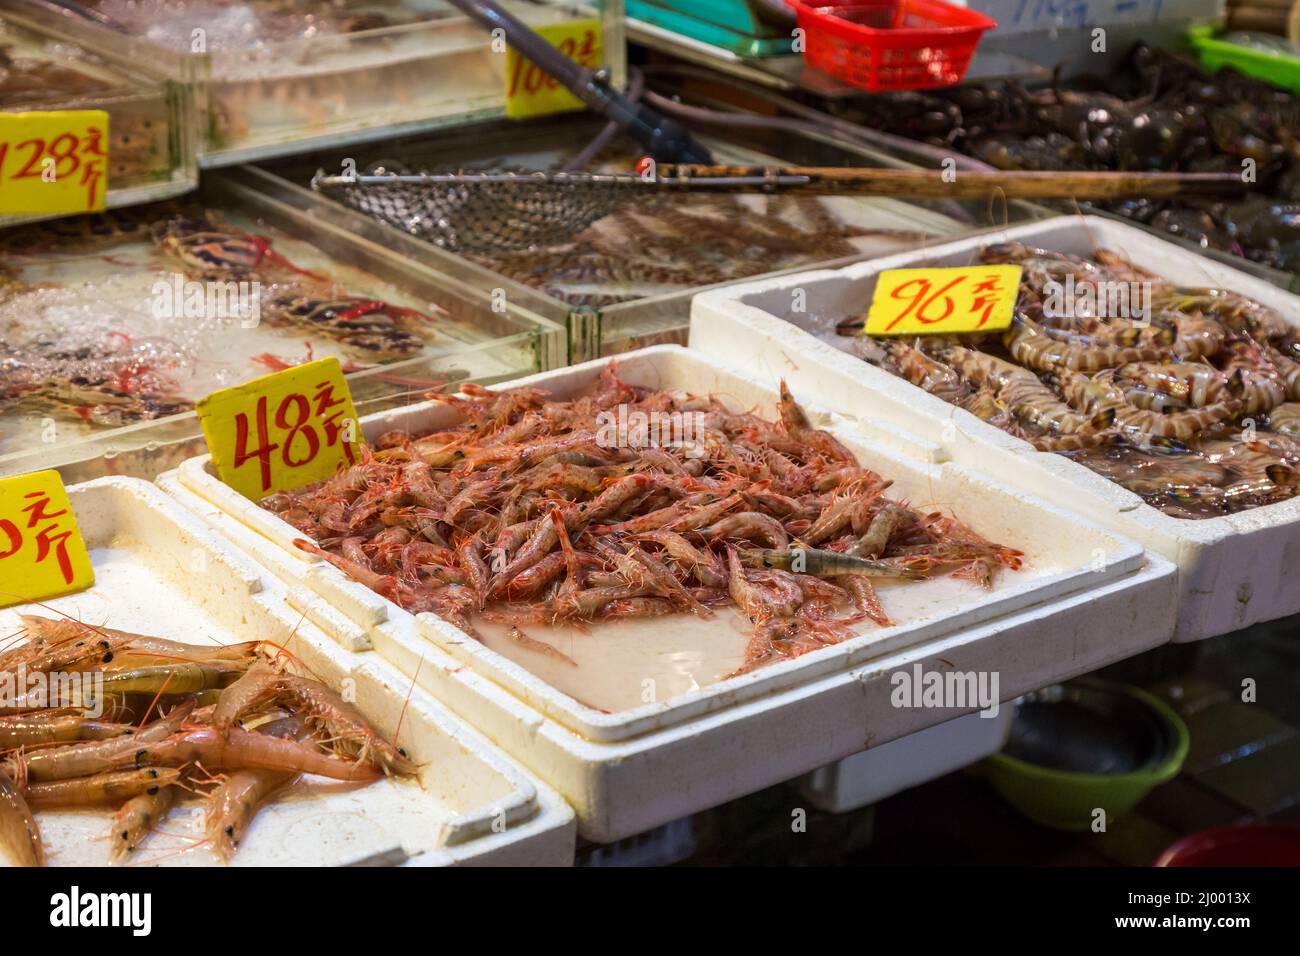 Different kind of shrimps and prawns being sold at a wet market in Hong Kong, China. Stock Photo